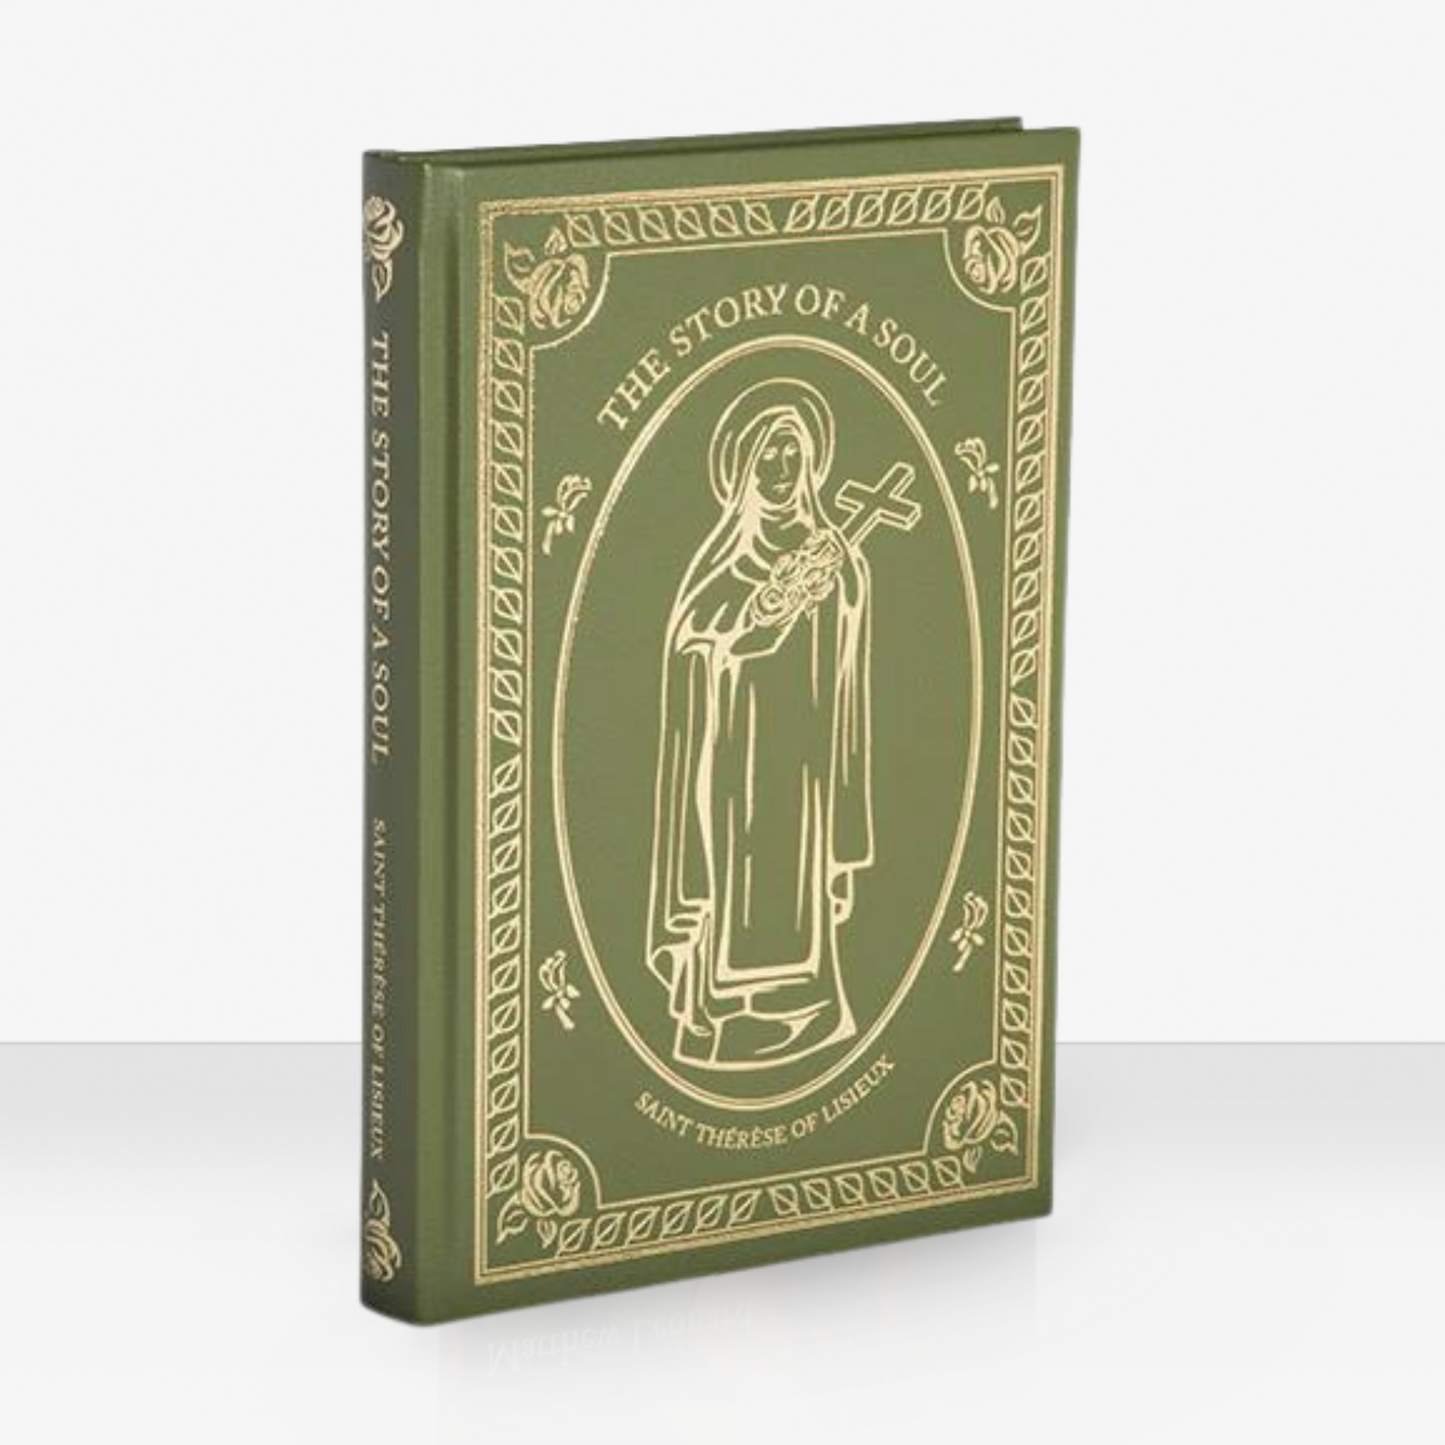 The Story of a Soul by St. Thérèse of Lisieux (Baronius Press Edition)